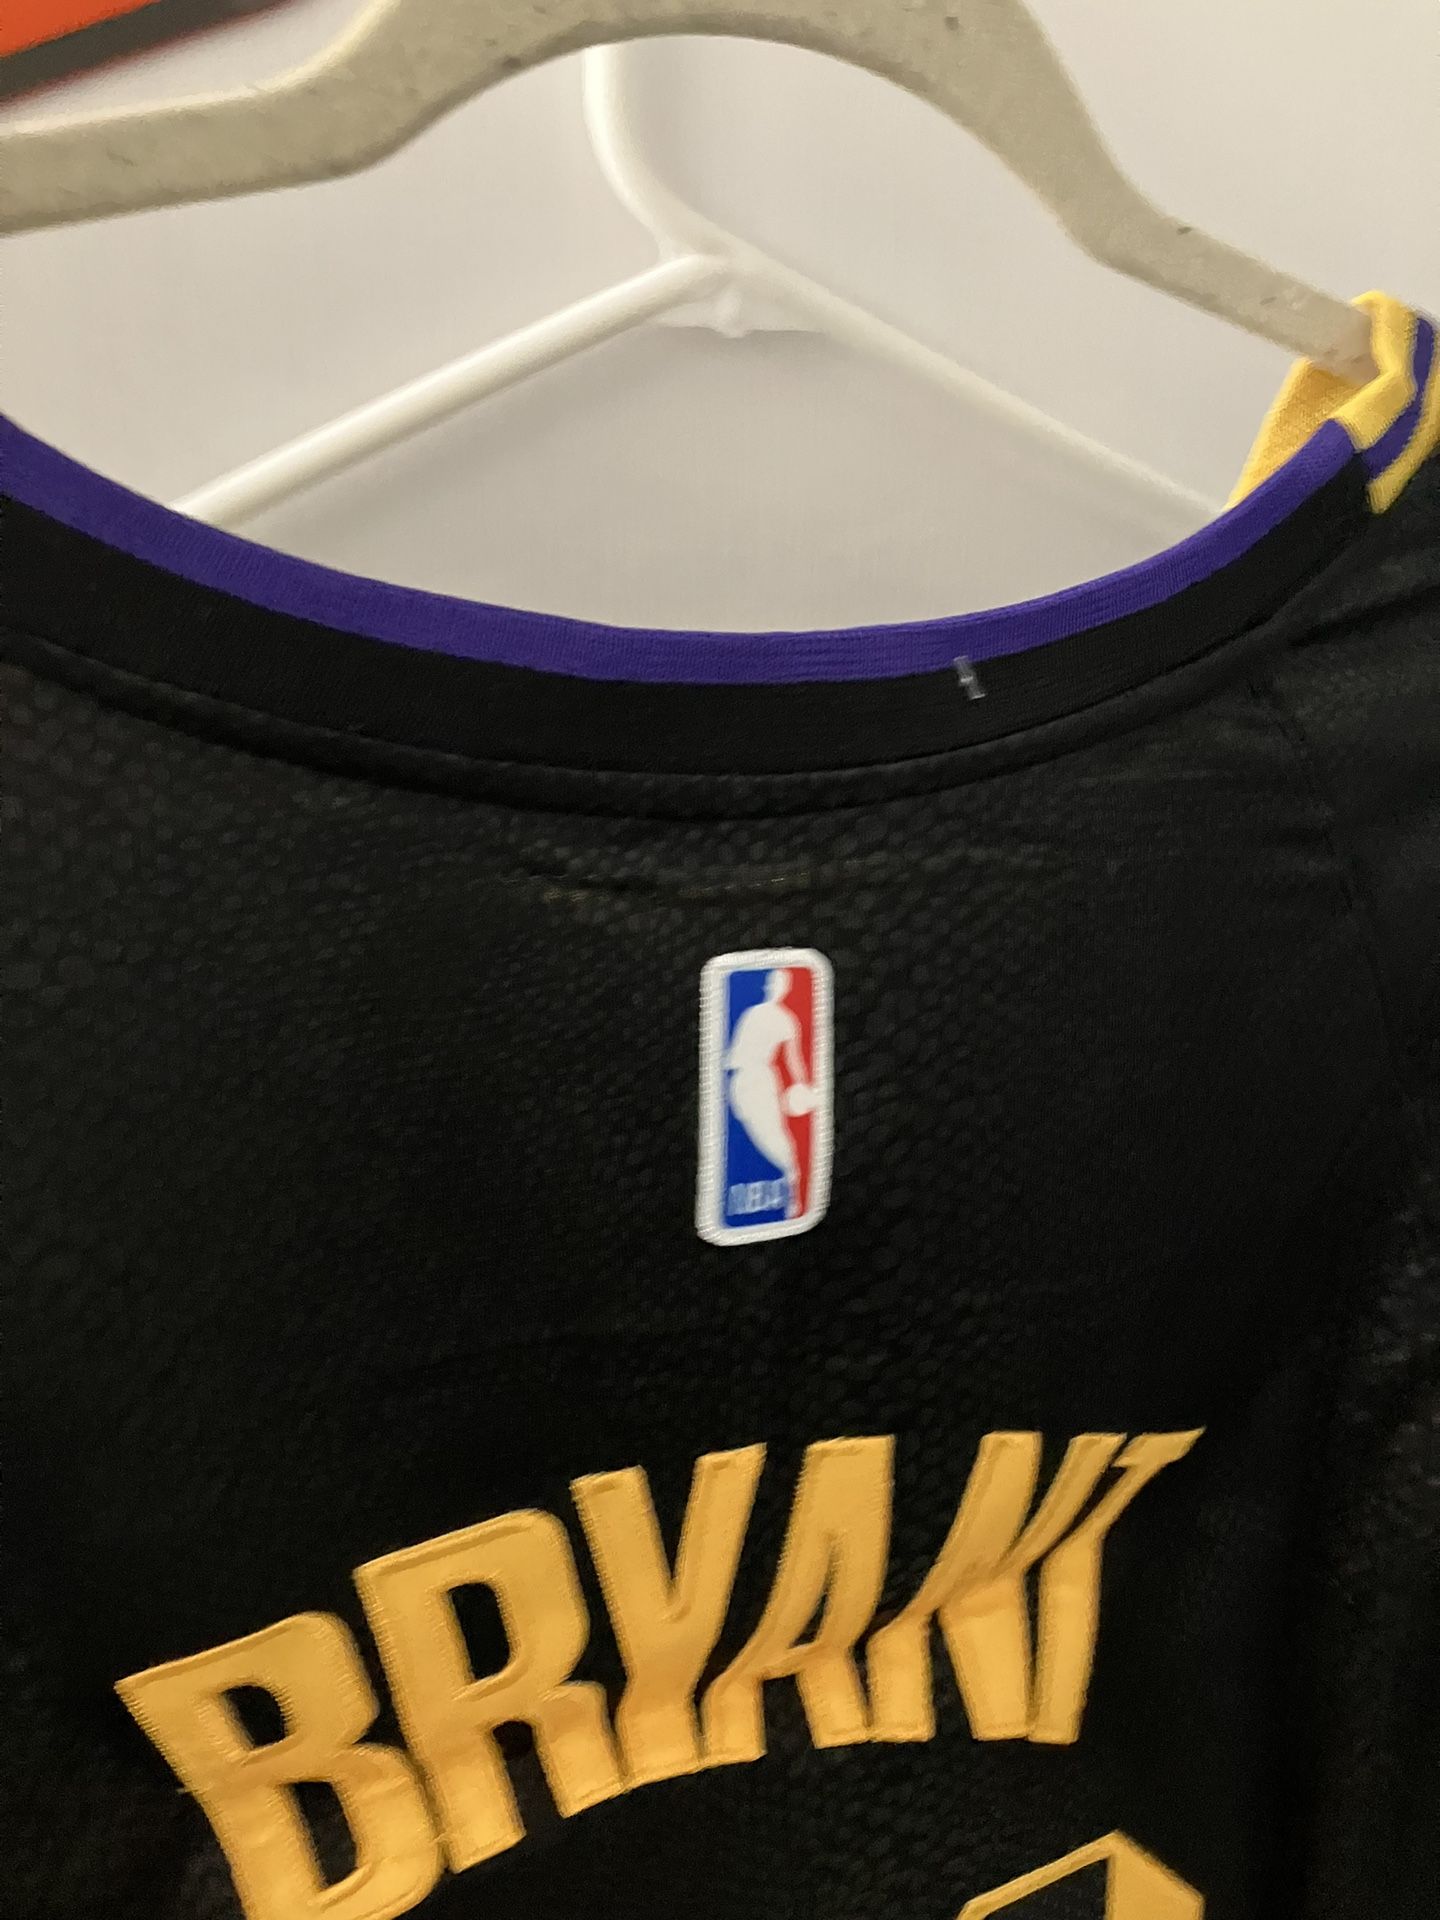 Kobe Bryant Lakers Black Mamba Nba Basketball Jersey Size xL Nwt for Sale  in Demarest, NJ - OfferUp